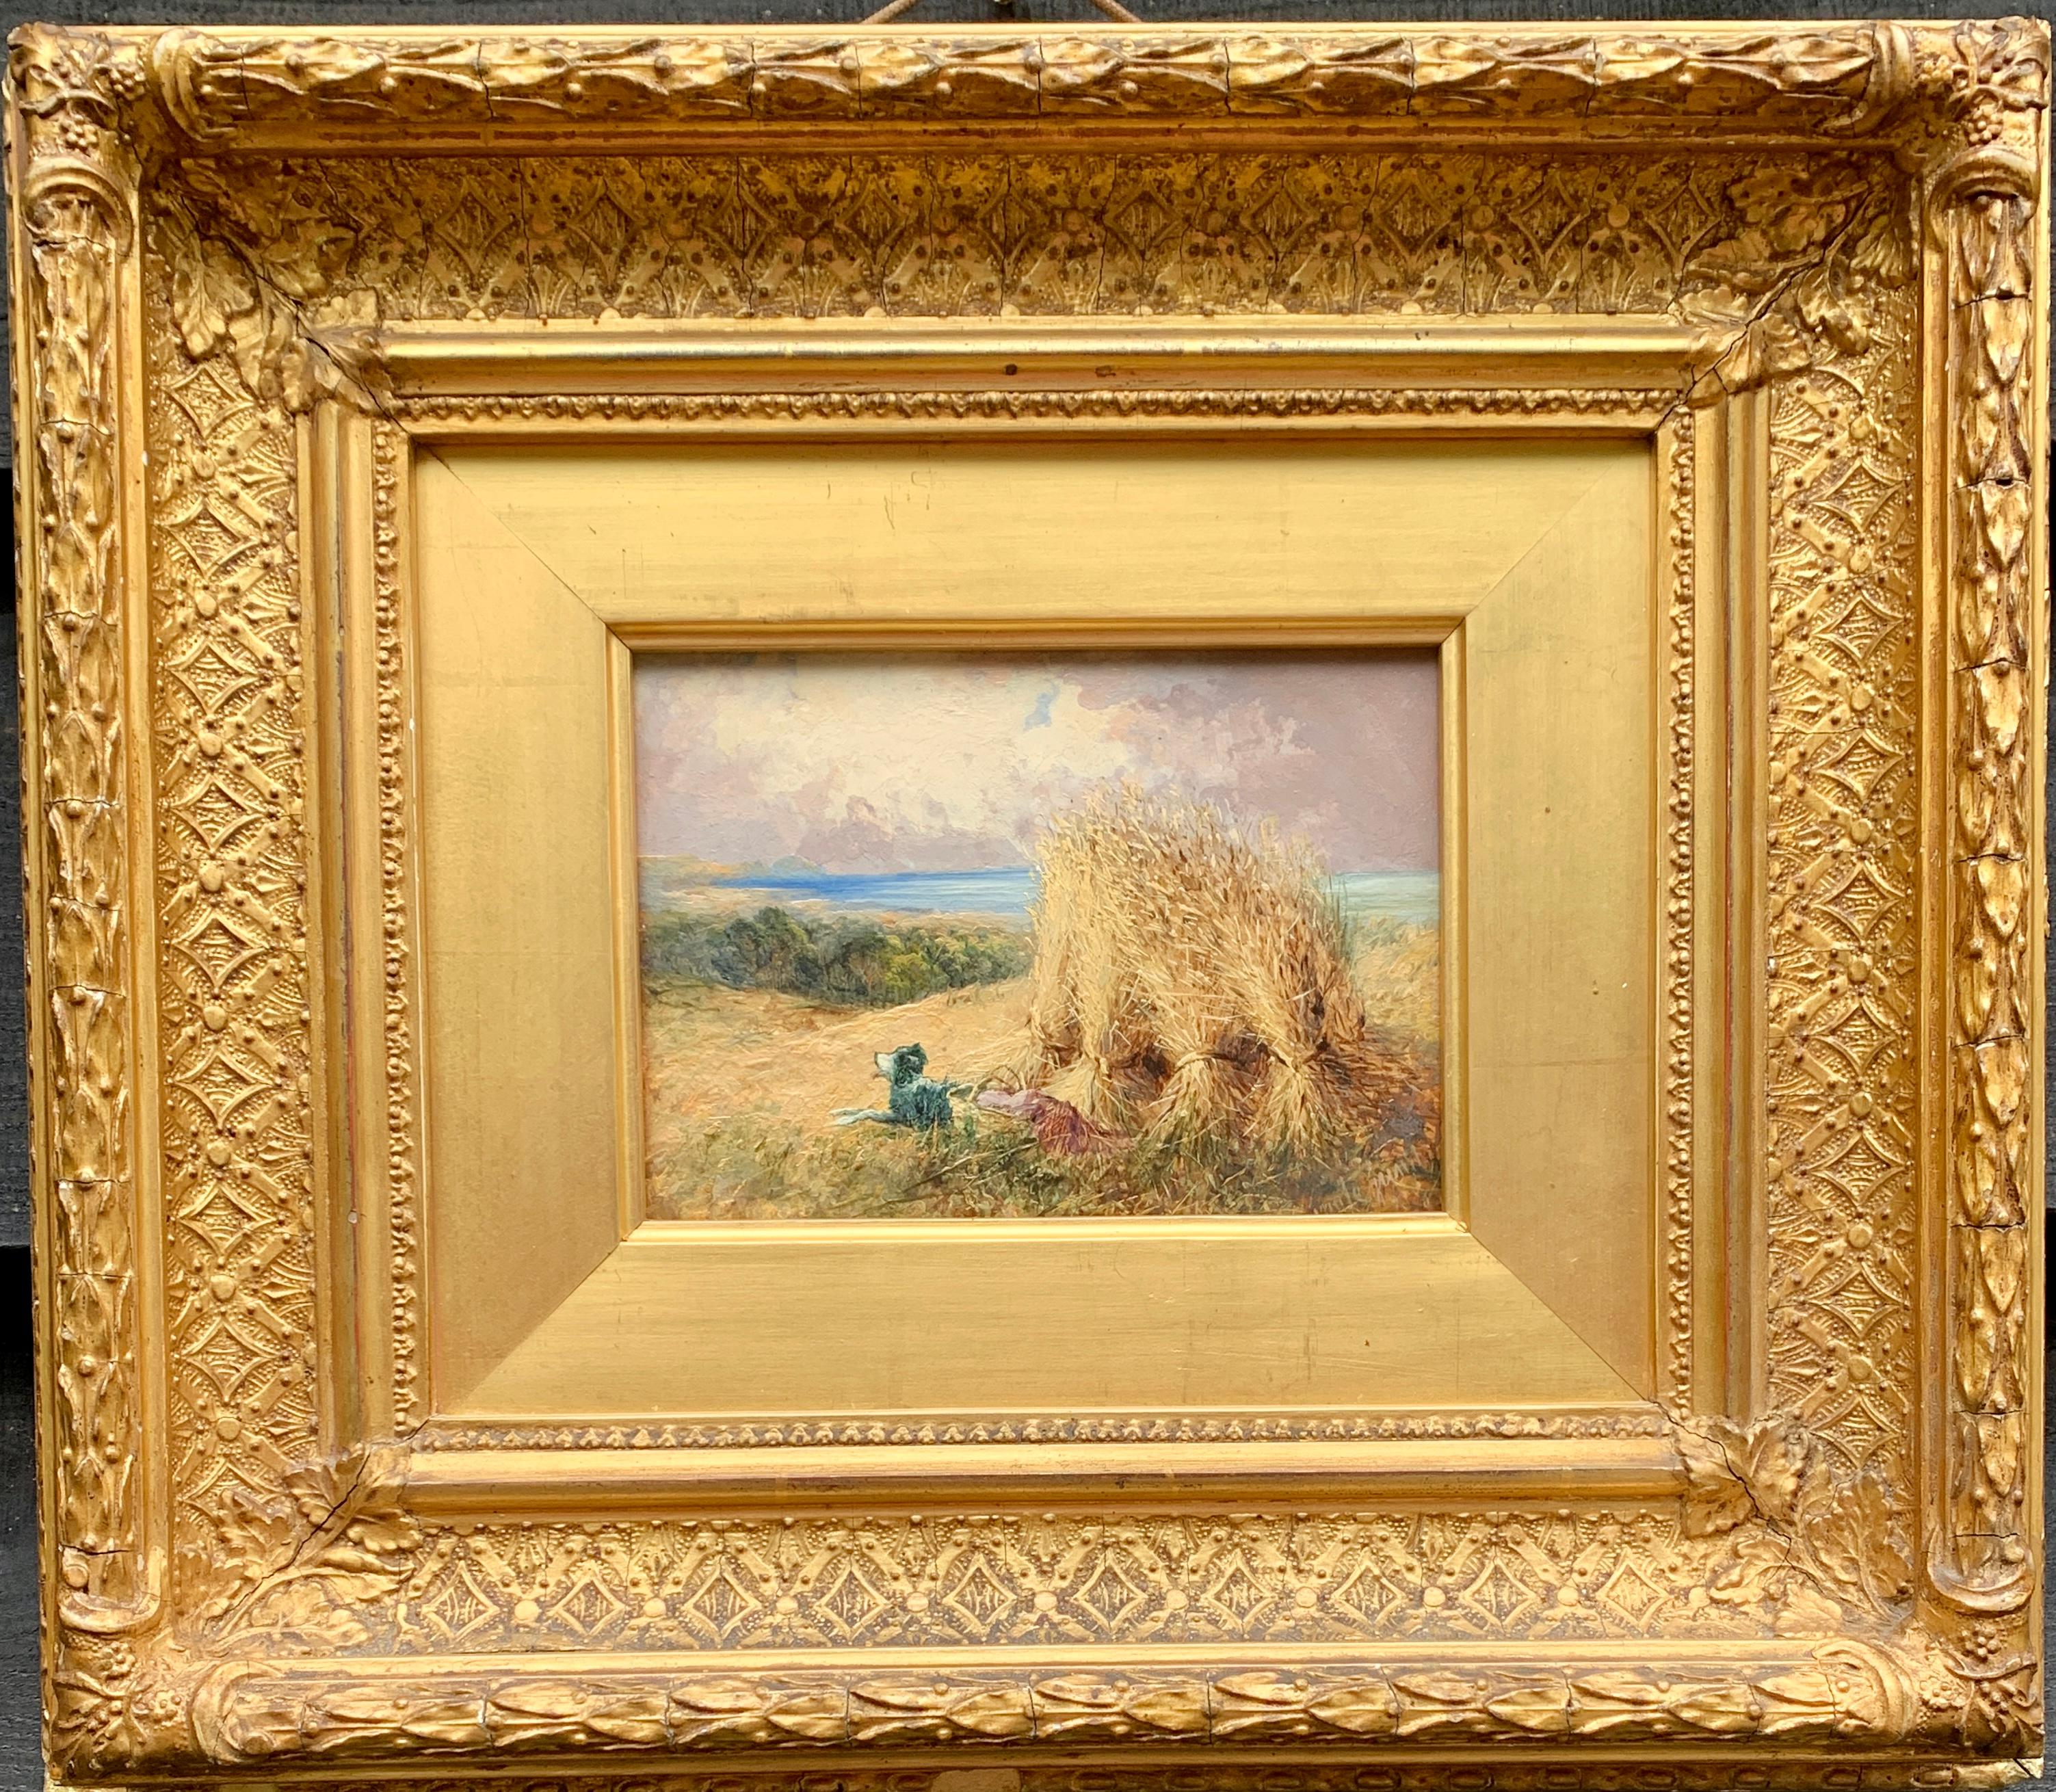 Thomas Dingle Junior Figurative Painting - Antique English Harvest landscape with corn stacks, dog and view of the sea